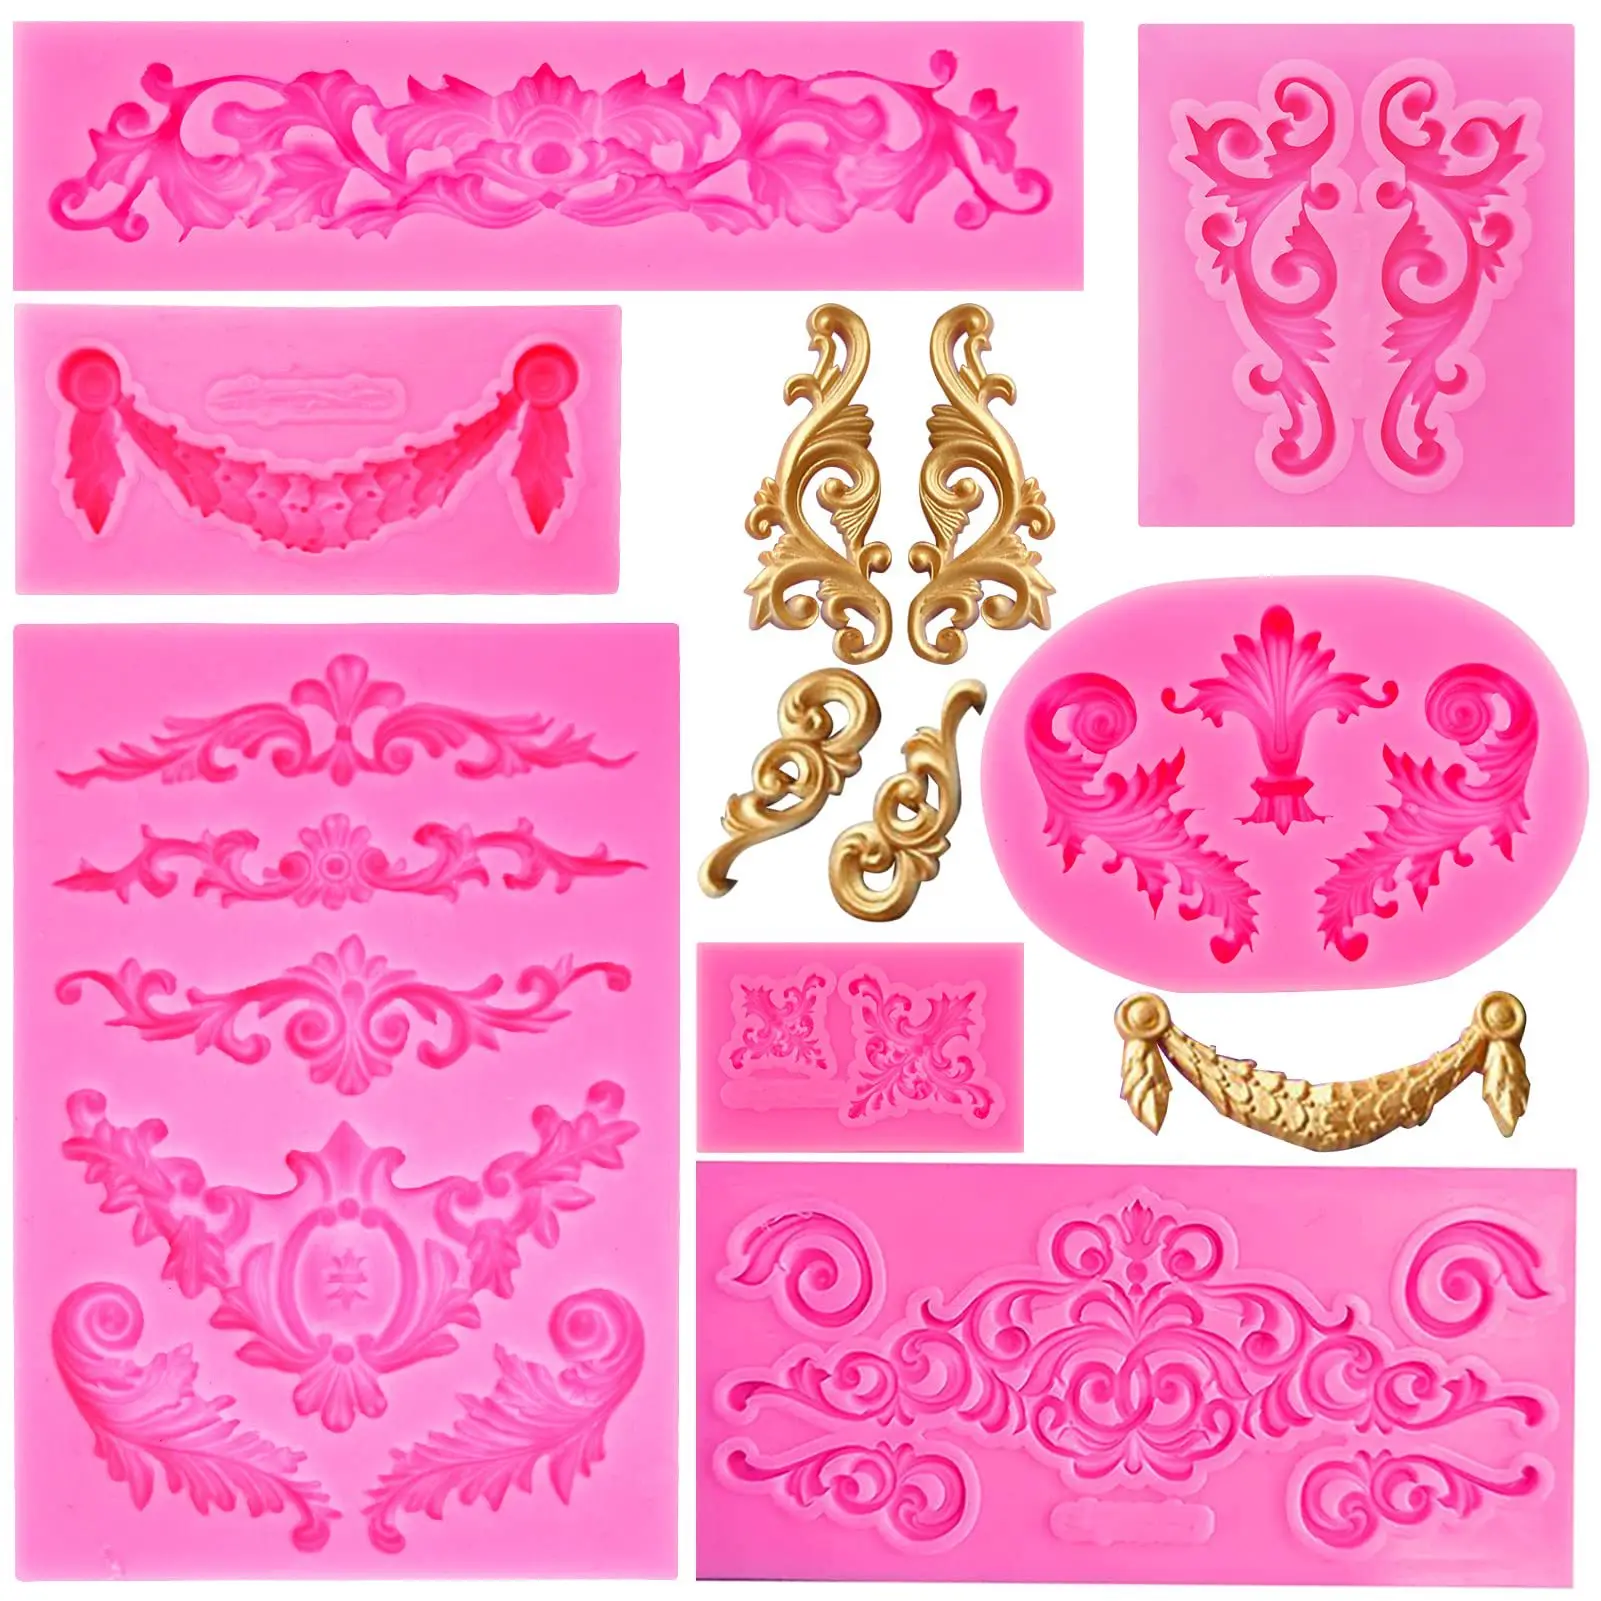 

3D Embossed Lace Mold Fondant Silicone Molds Baroque Style Cake Decorating Tools Kitchen Baking Resin Mould